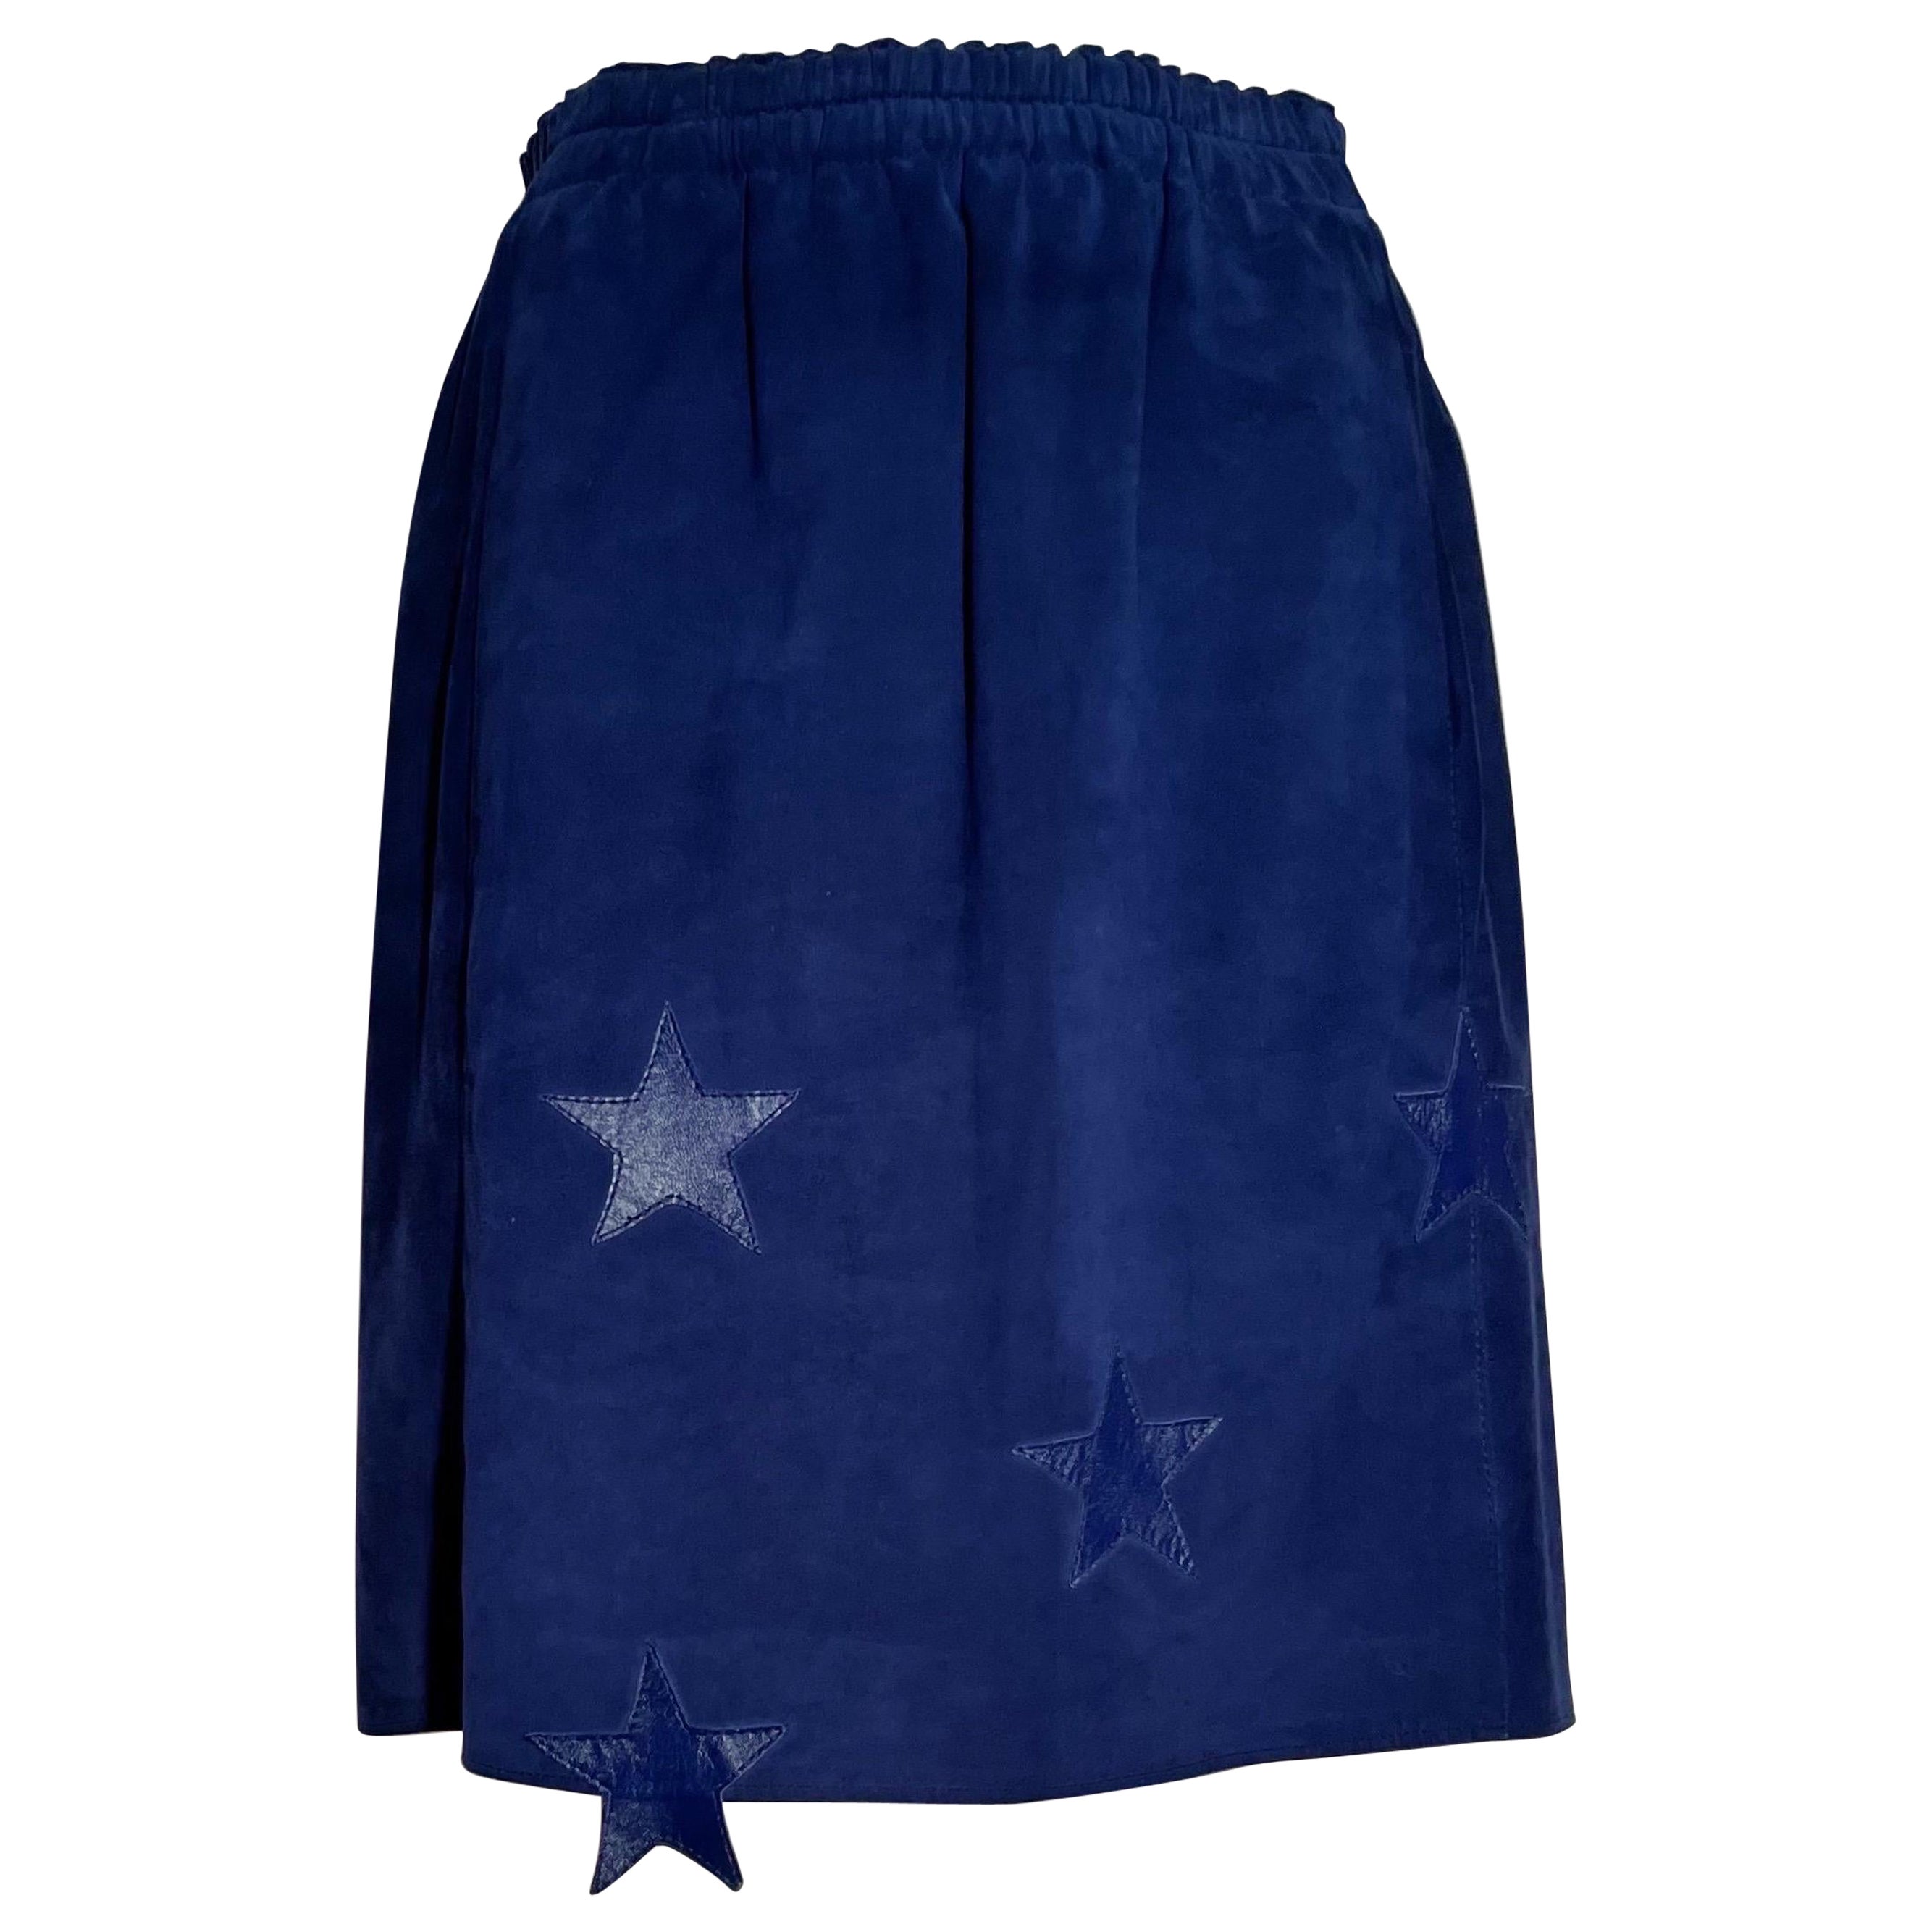 Angelo Tarlazzi Suede Star Skirt  For Sale